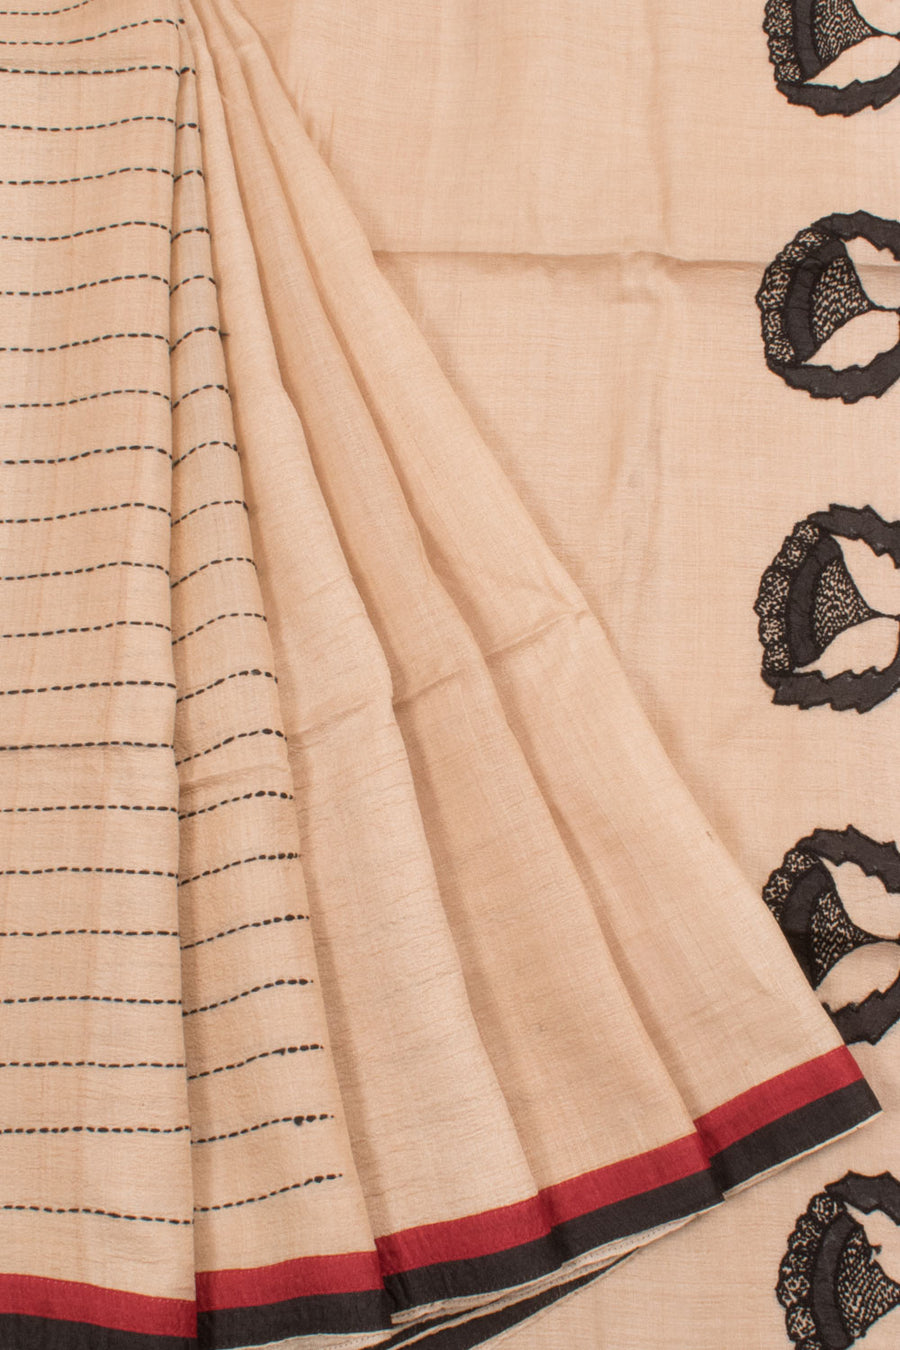 Hand Embroidered Half and Half Tussar Silk Saree with Stripes and Applique, Sujini Embroidered Pallu